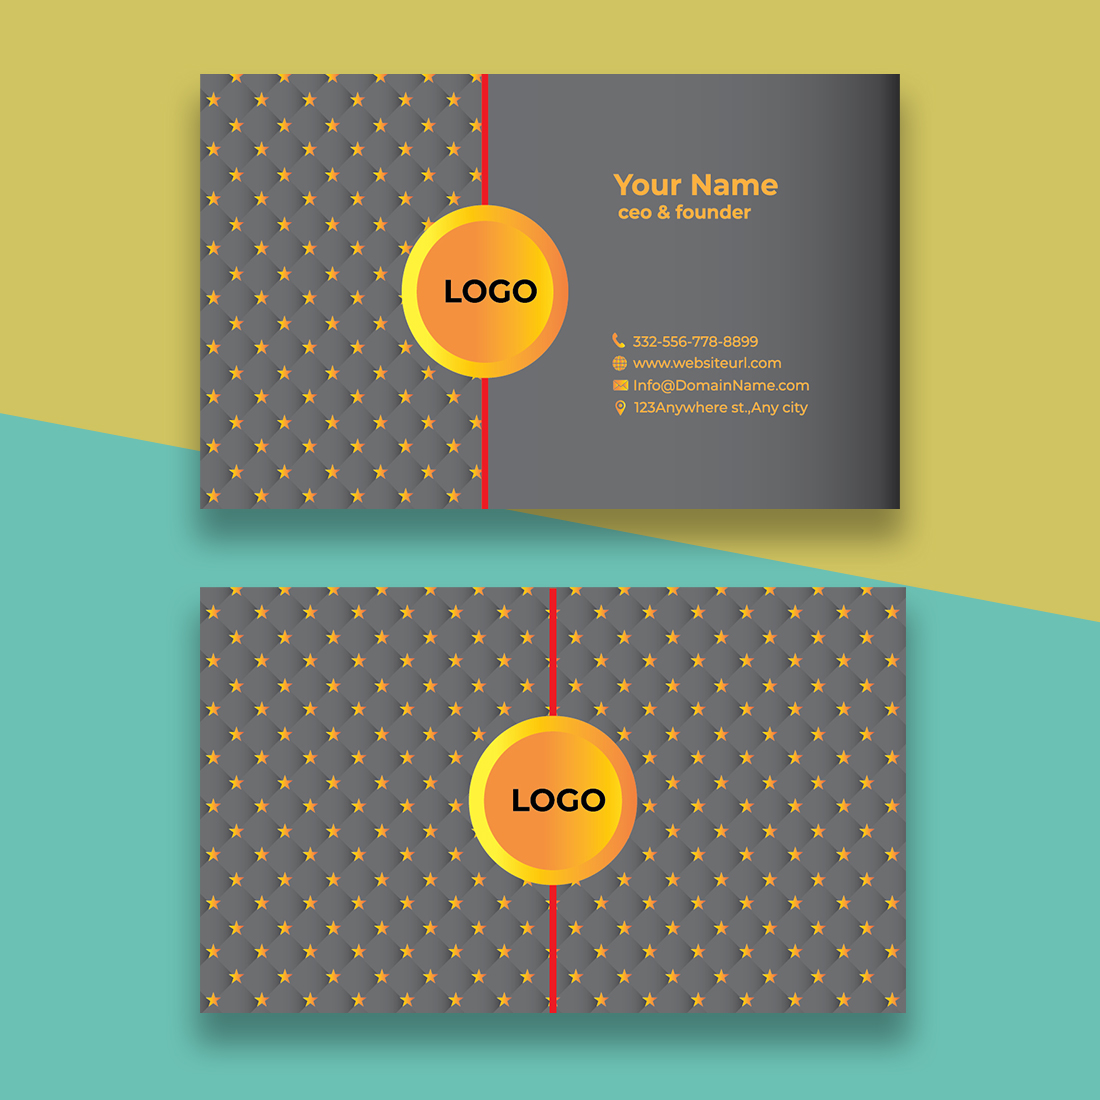 Luxury and Unique business card cover image.